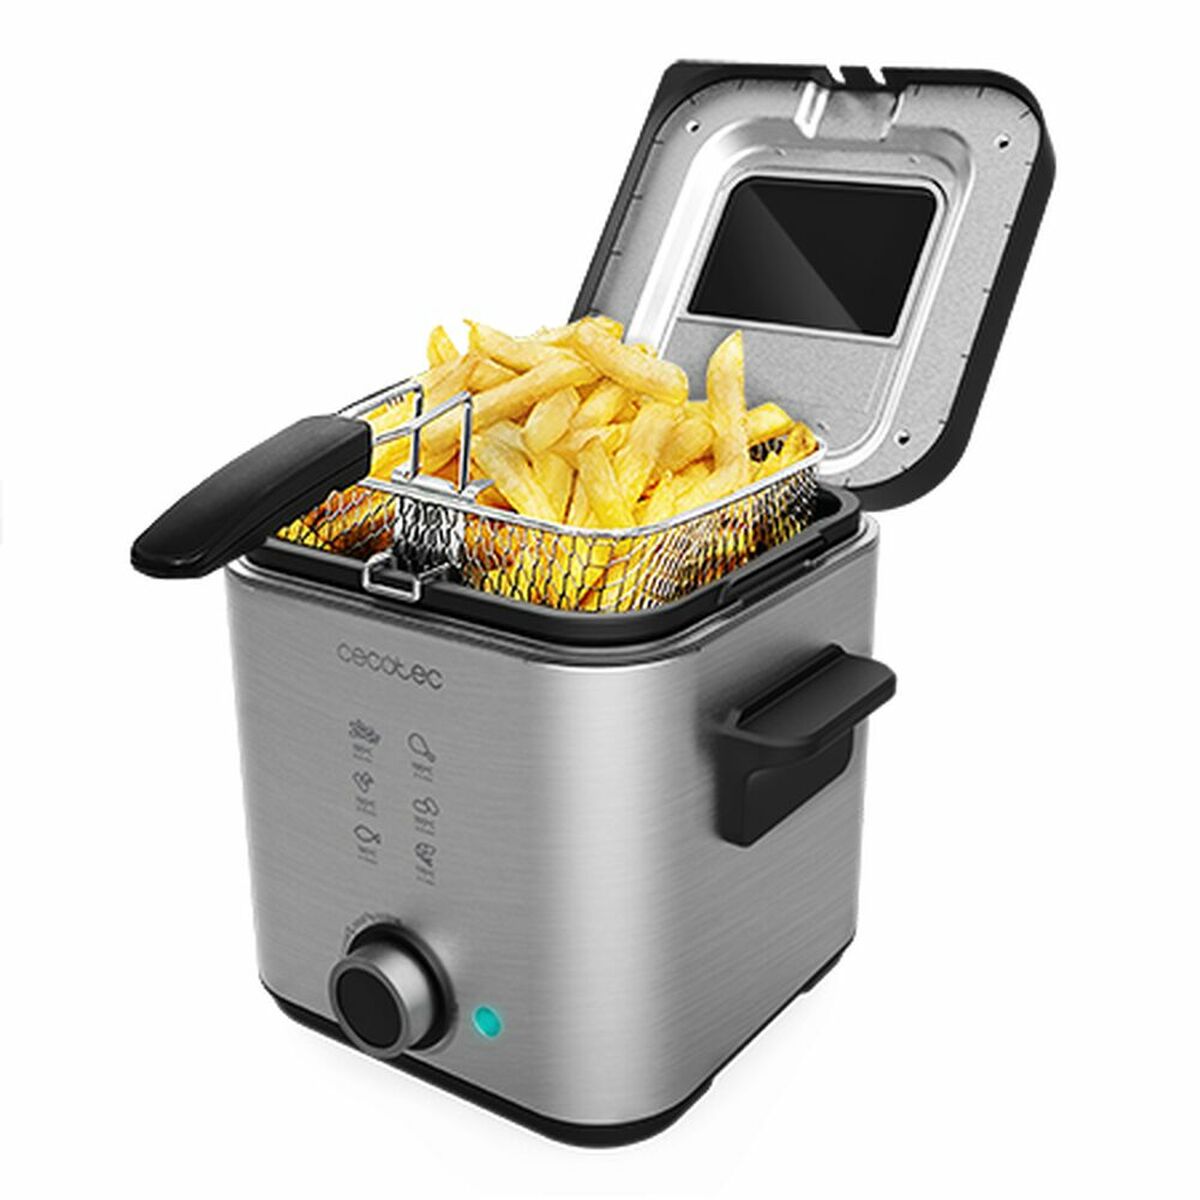 Fritteuse Cecotec CleanFry Advance 1500 Inox 900 W 1,5 L - CA International 